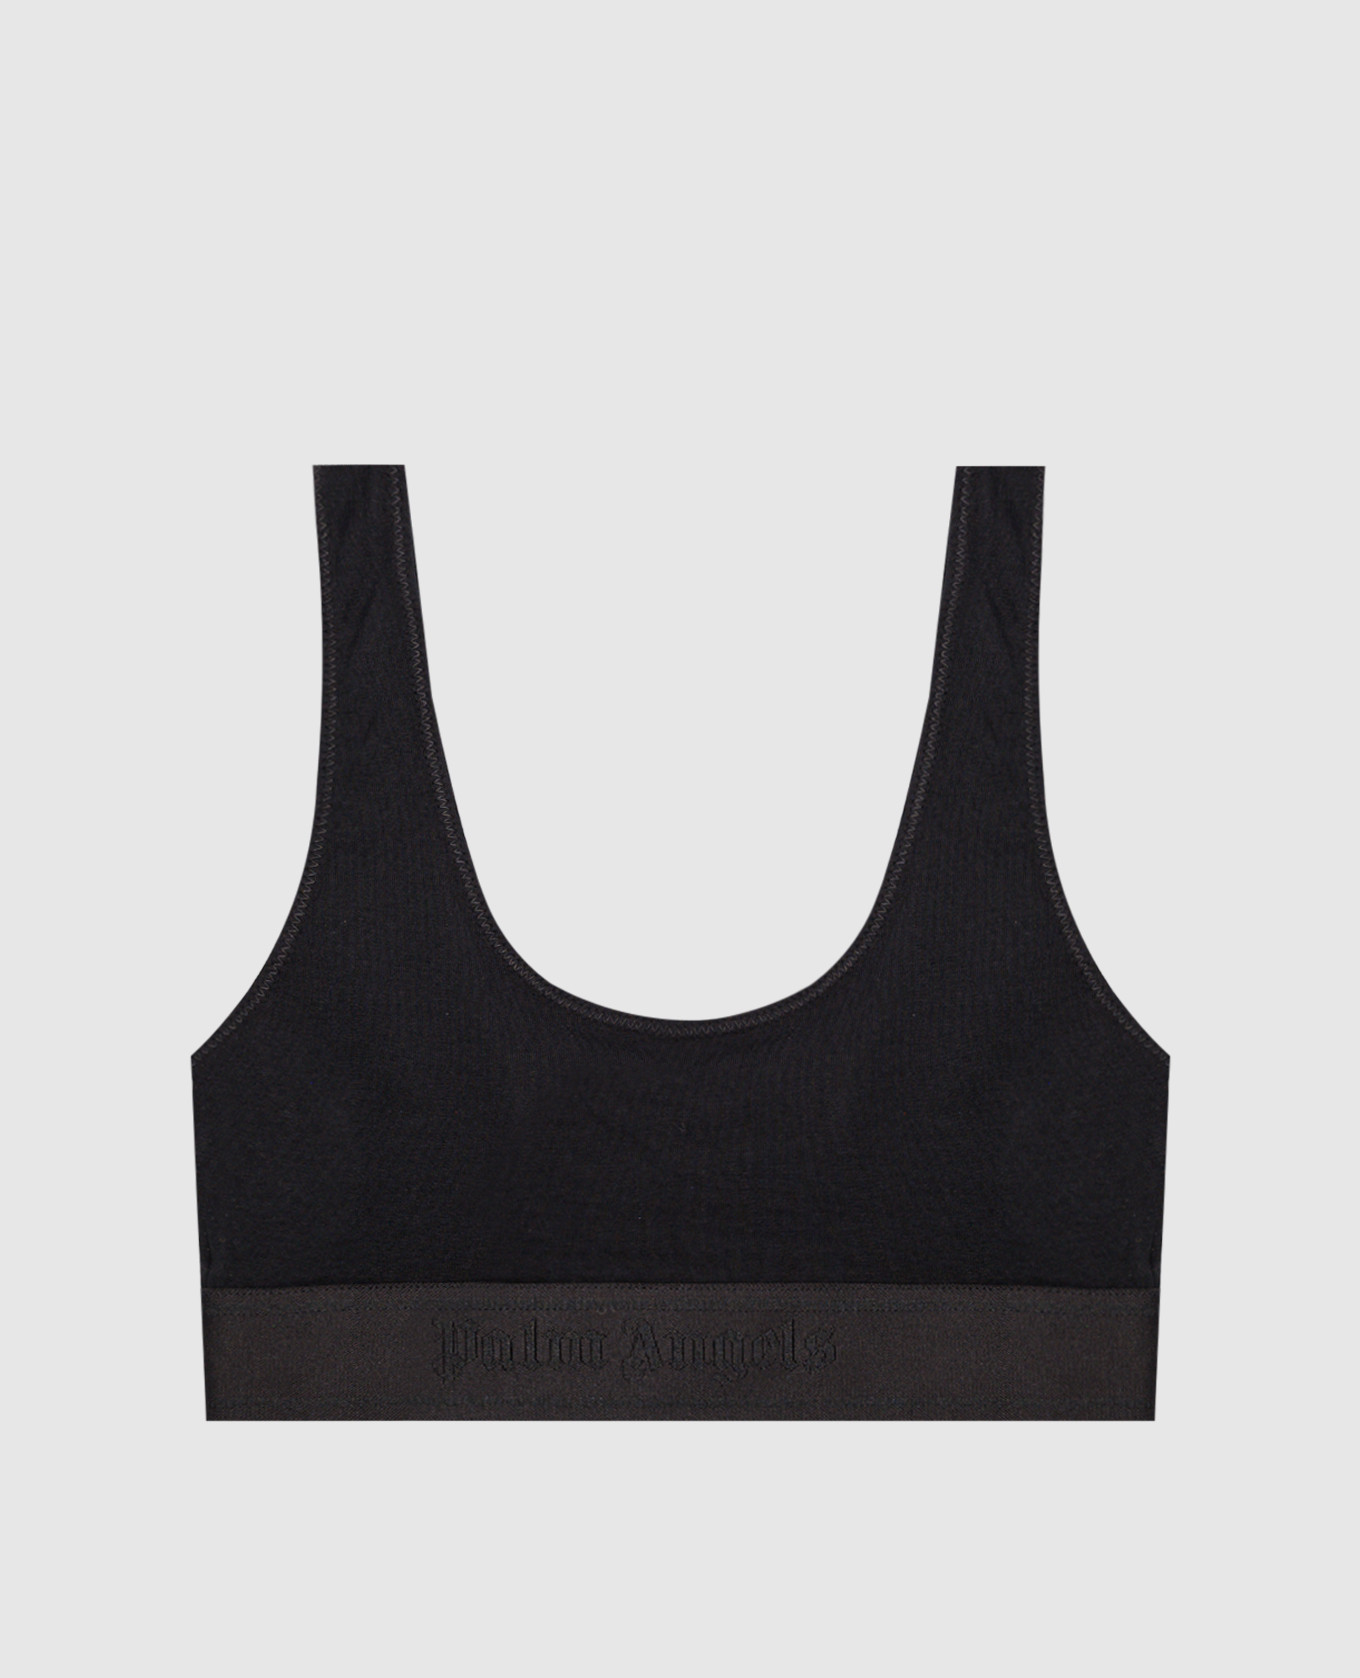 Black top with logo pattern